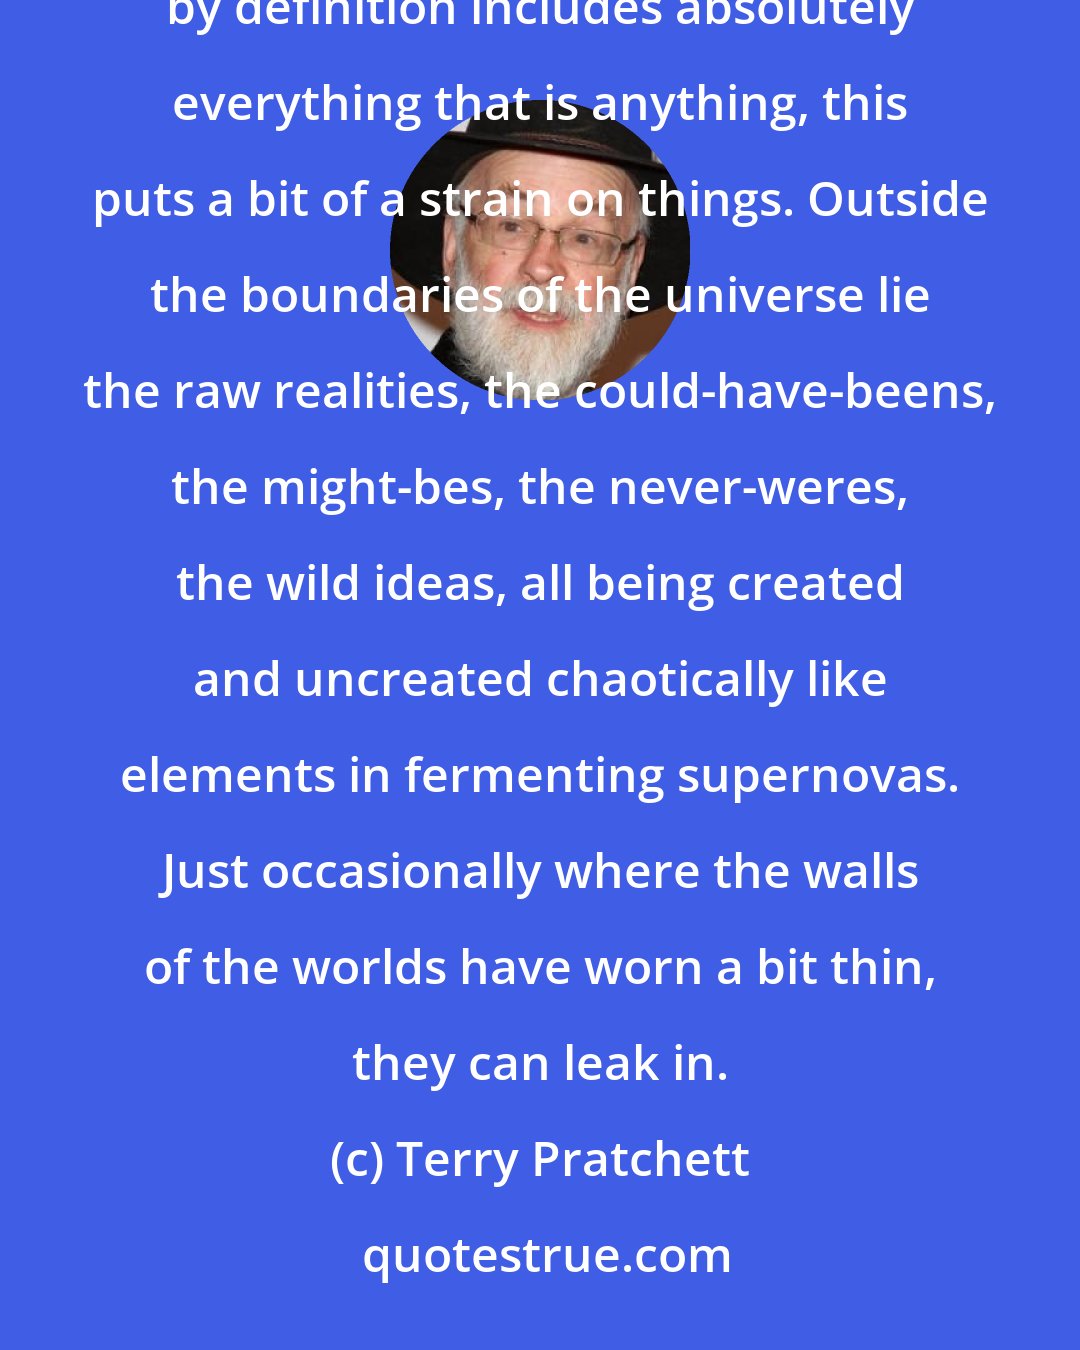 Terry Pratchett: at least nine-tenths of all the original reality ever created lies outside the multiverse, and since the multiverse by definition includes absolutely everything that is anything, this puts a bit of a strain on things. Outside the boundaries of the universe lie the raw realities, the could-have-beens, the might-bes, the never-weres, the wild ideas, all being created and uncreated chaotically like elements in fermenting supernovas. Just occasionally where the walls of the worlds have worn a bit thin, they can leak in.